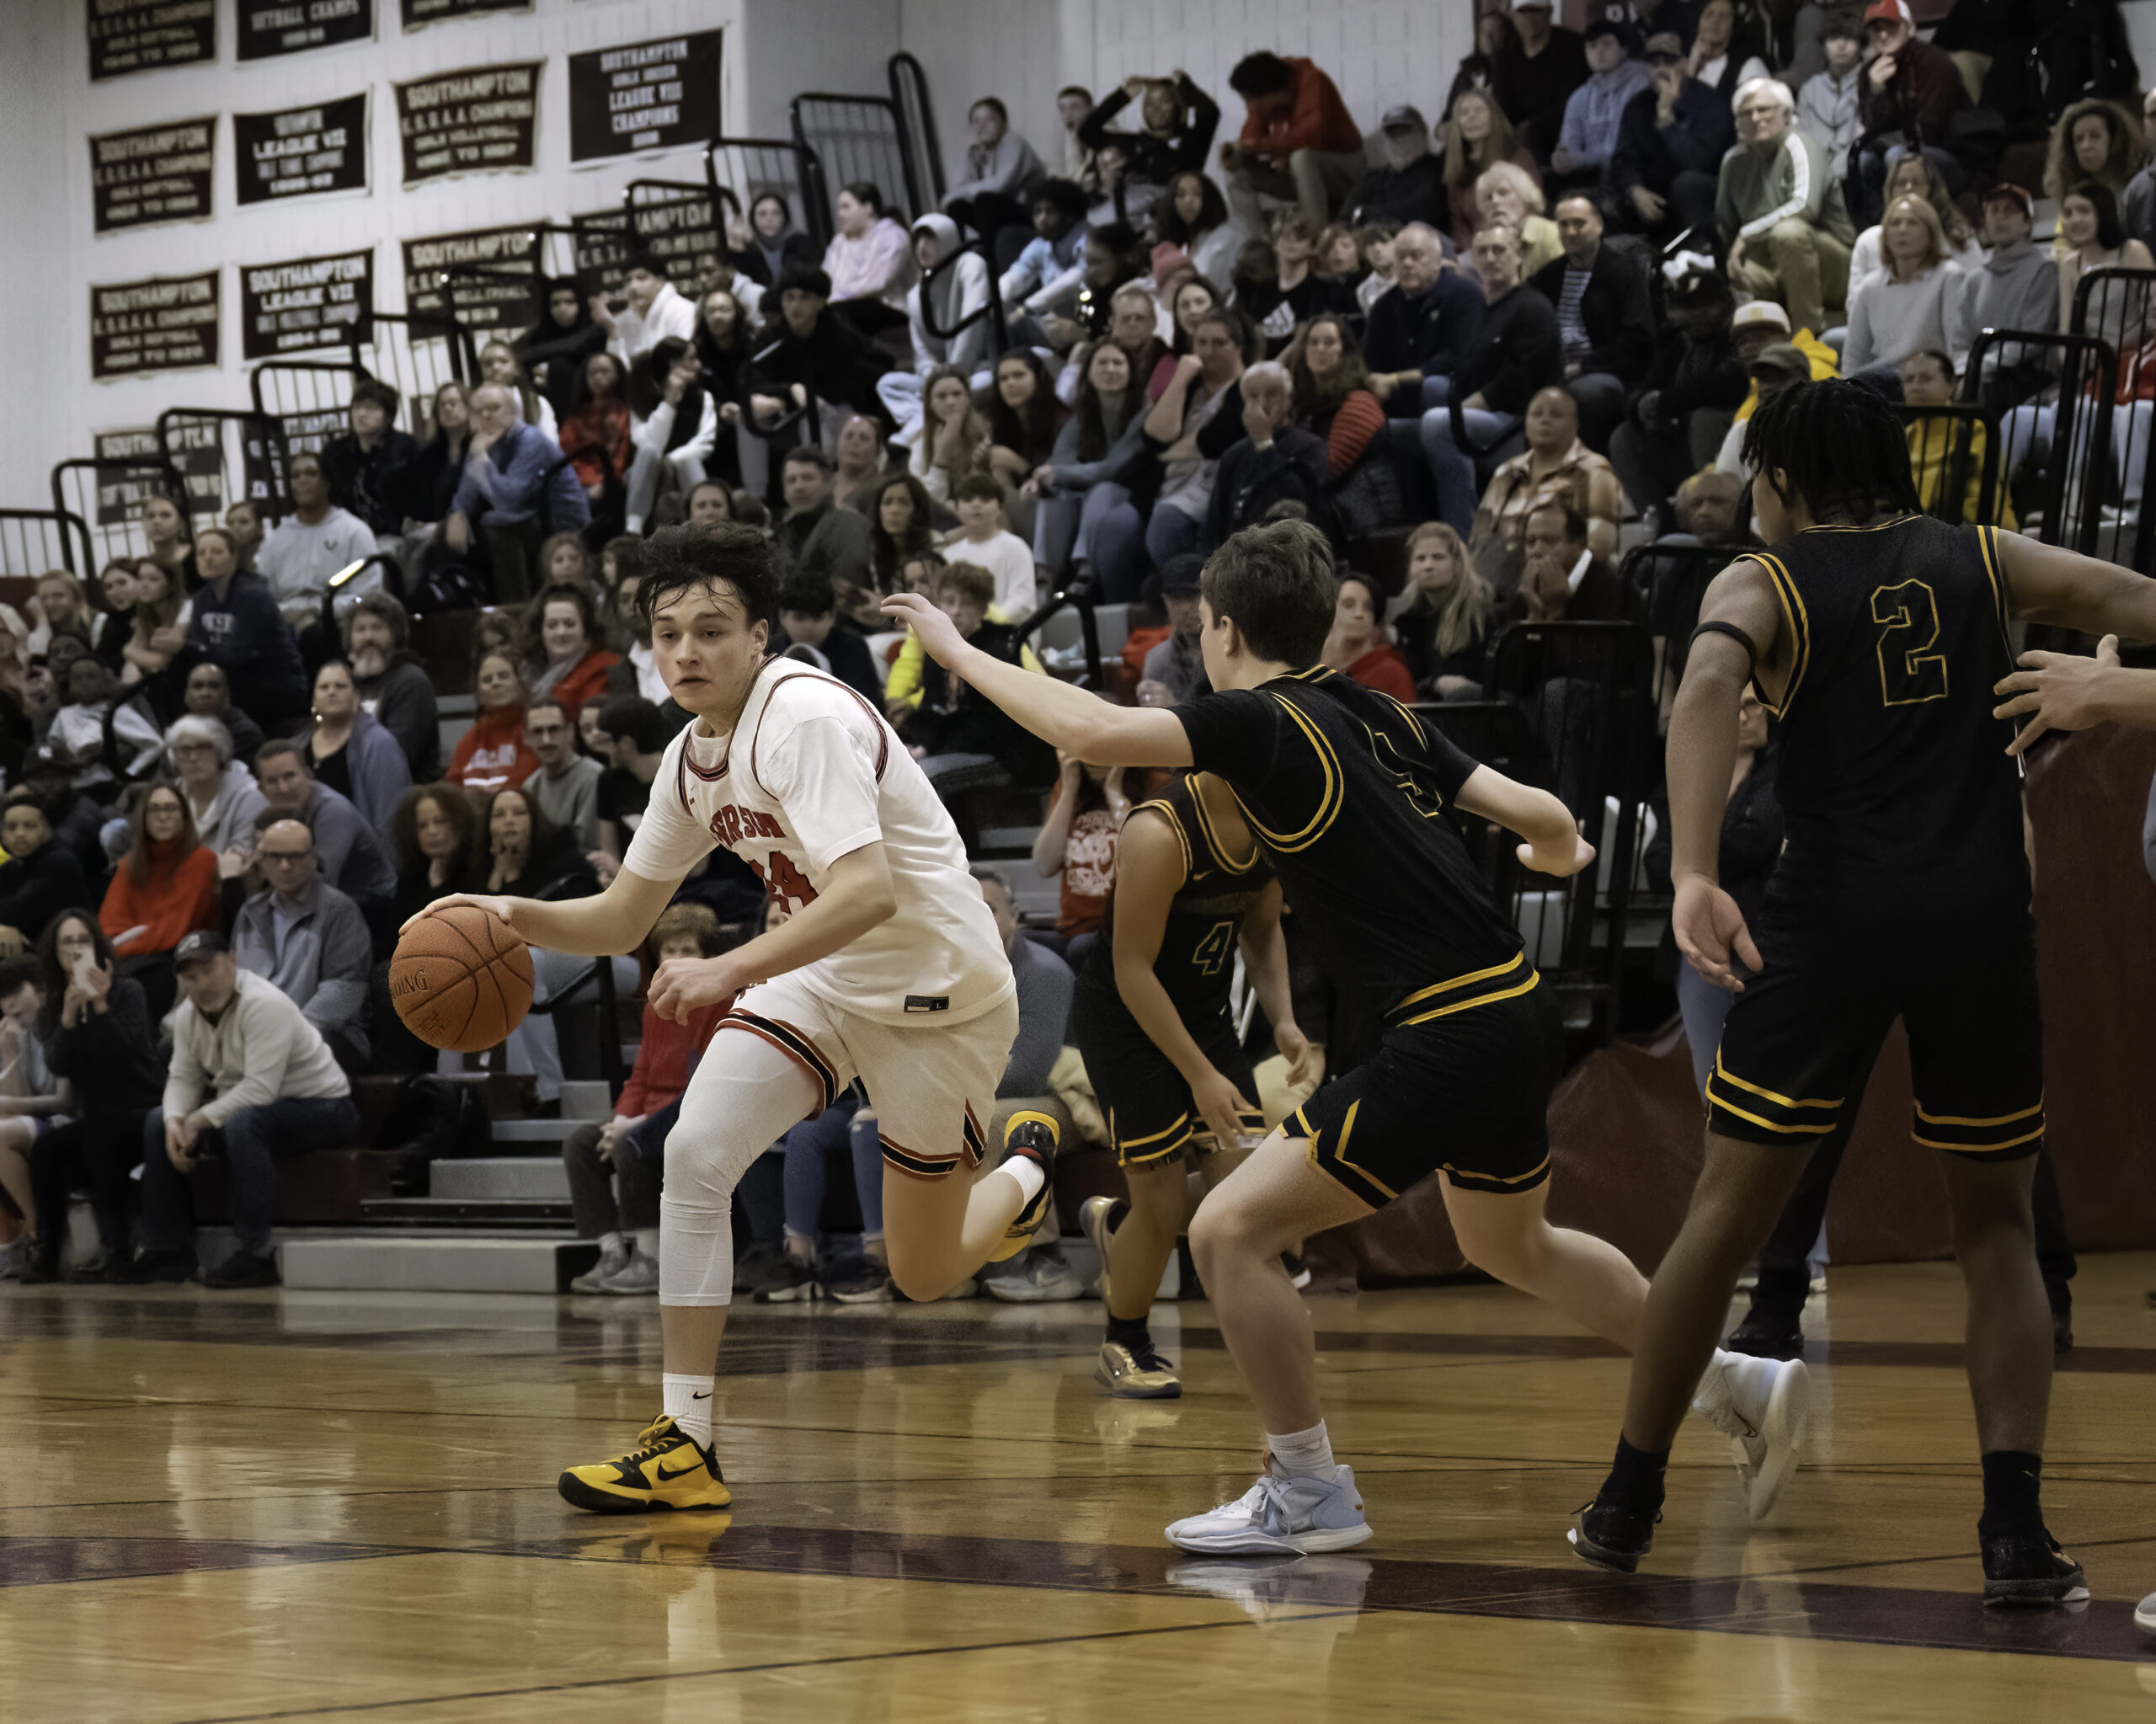 Pierson junior Aven Smith broke out for 13 points in the third quarter alone to help the Whalers defeat the Killer Bees, 76-53, and advance in the Section XI Tournament.   MARIANNE BARNETT